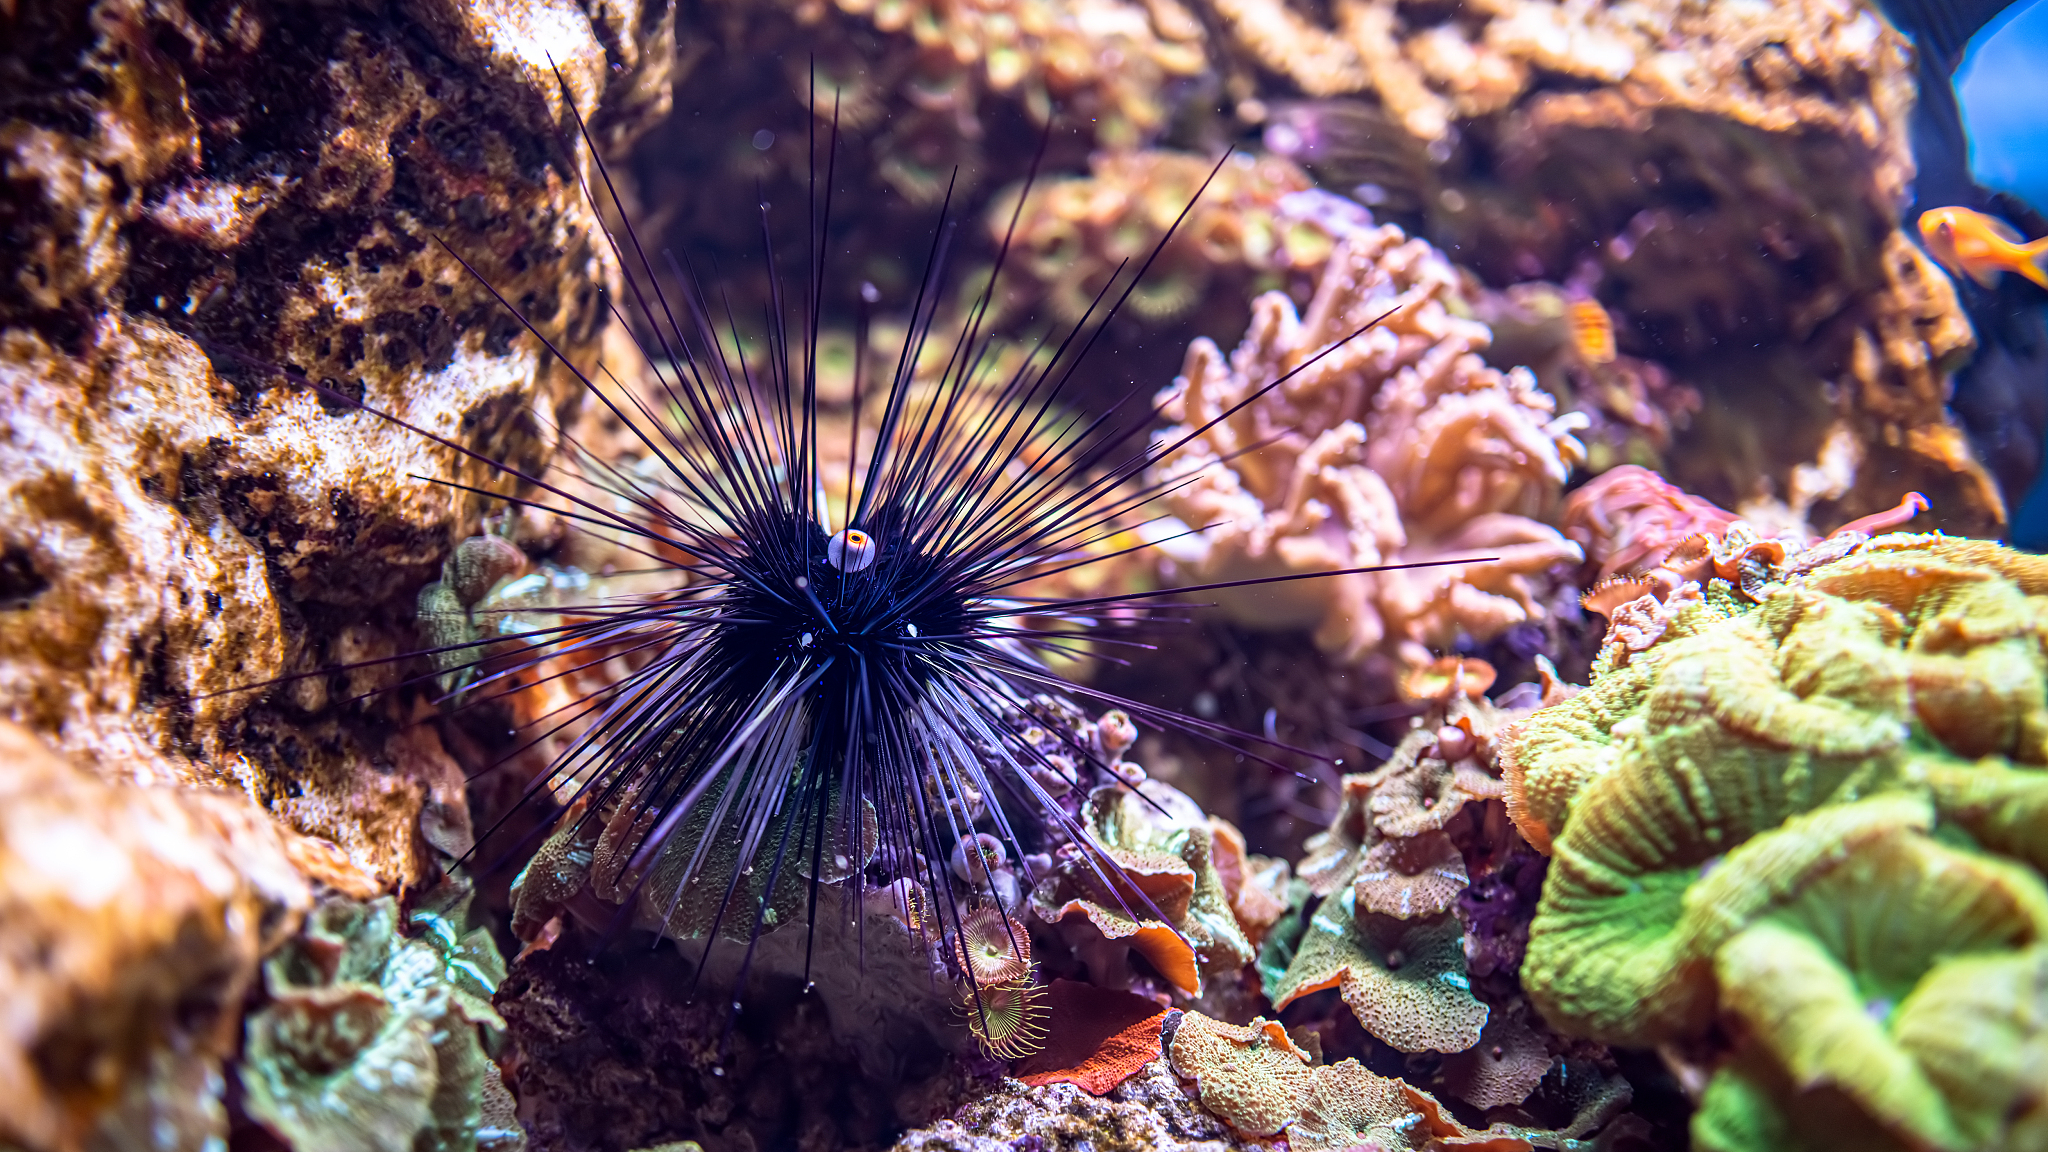 An estimated hundreds of thousands of urchins have died of the scuticociliate parasite so far, according to the researchers. /CFP